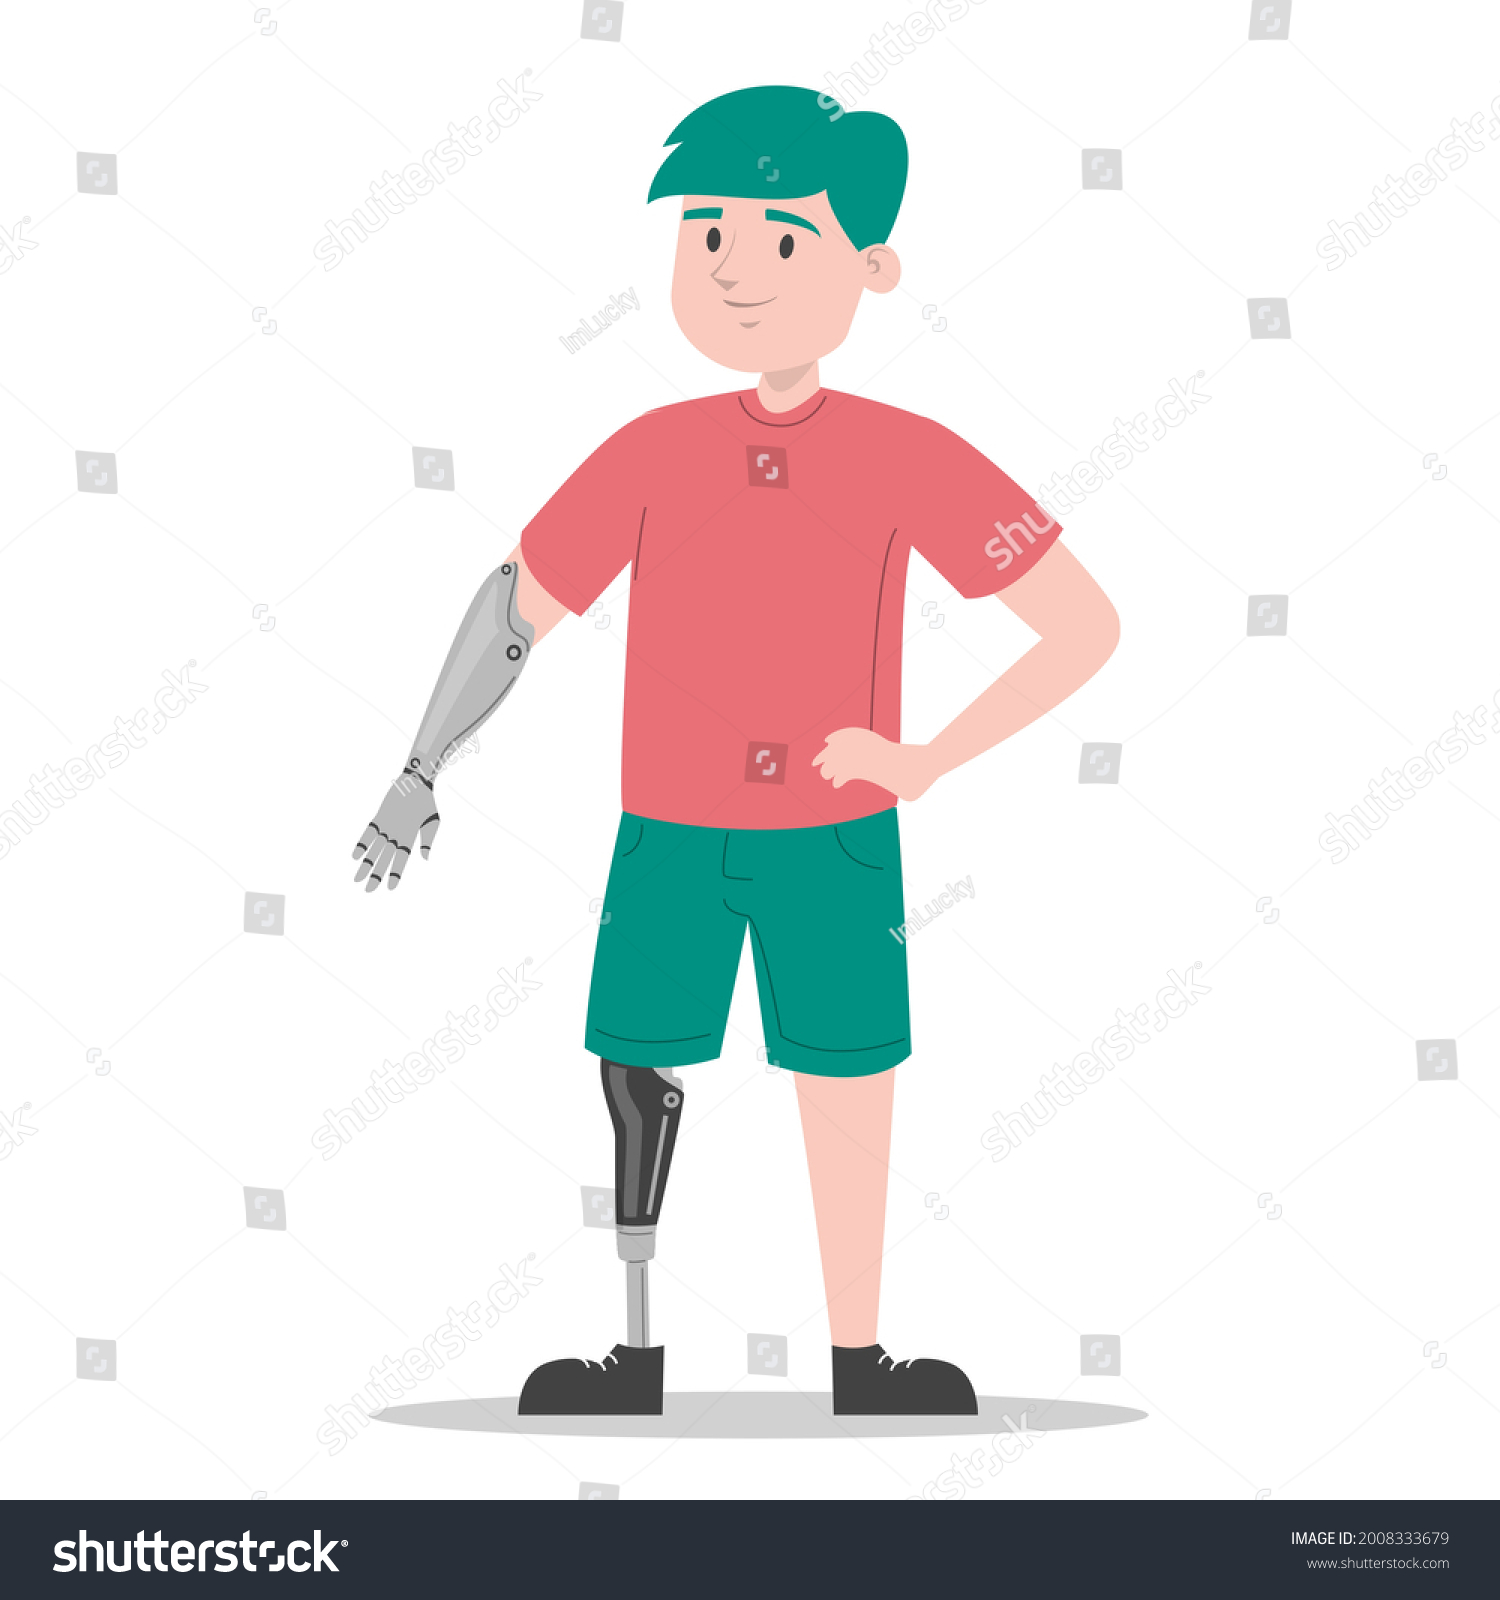 SVG of Happy young boy with prosthetic leg and arm vector isolated. Illustration of a child wearing a prosthesis. Handicapped person, kid with artificial limbs. svg